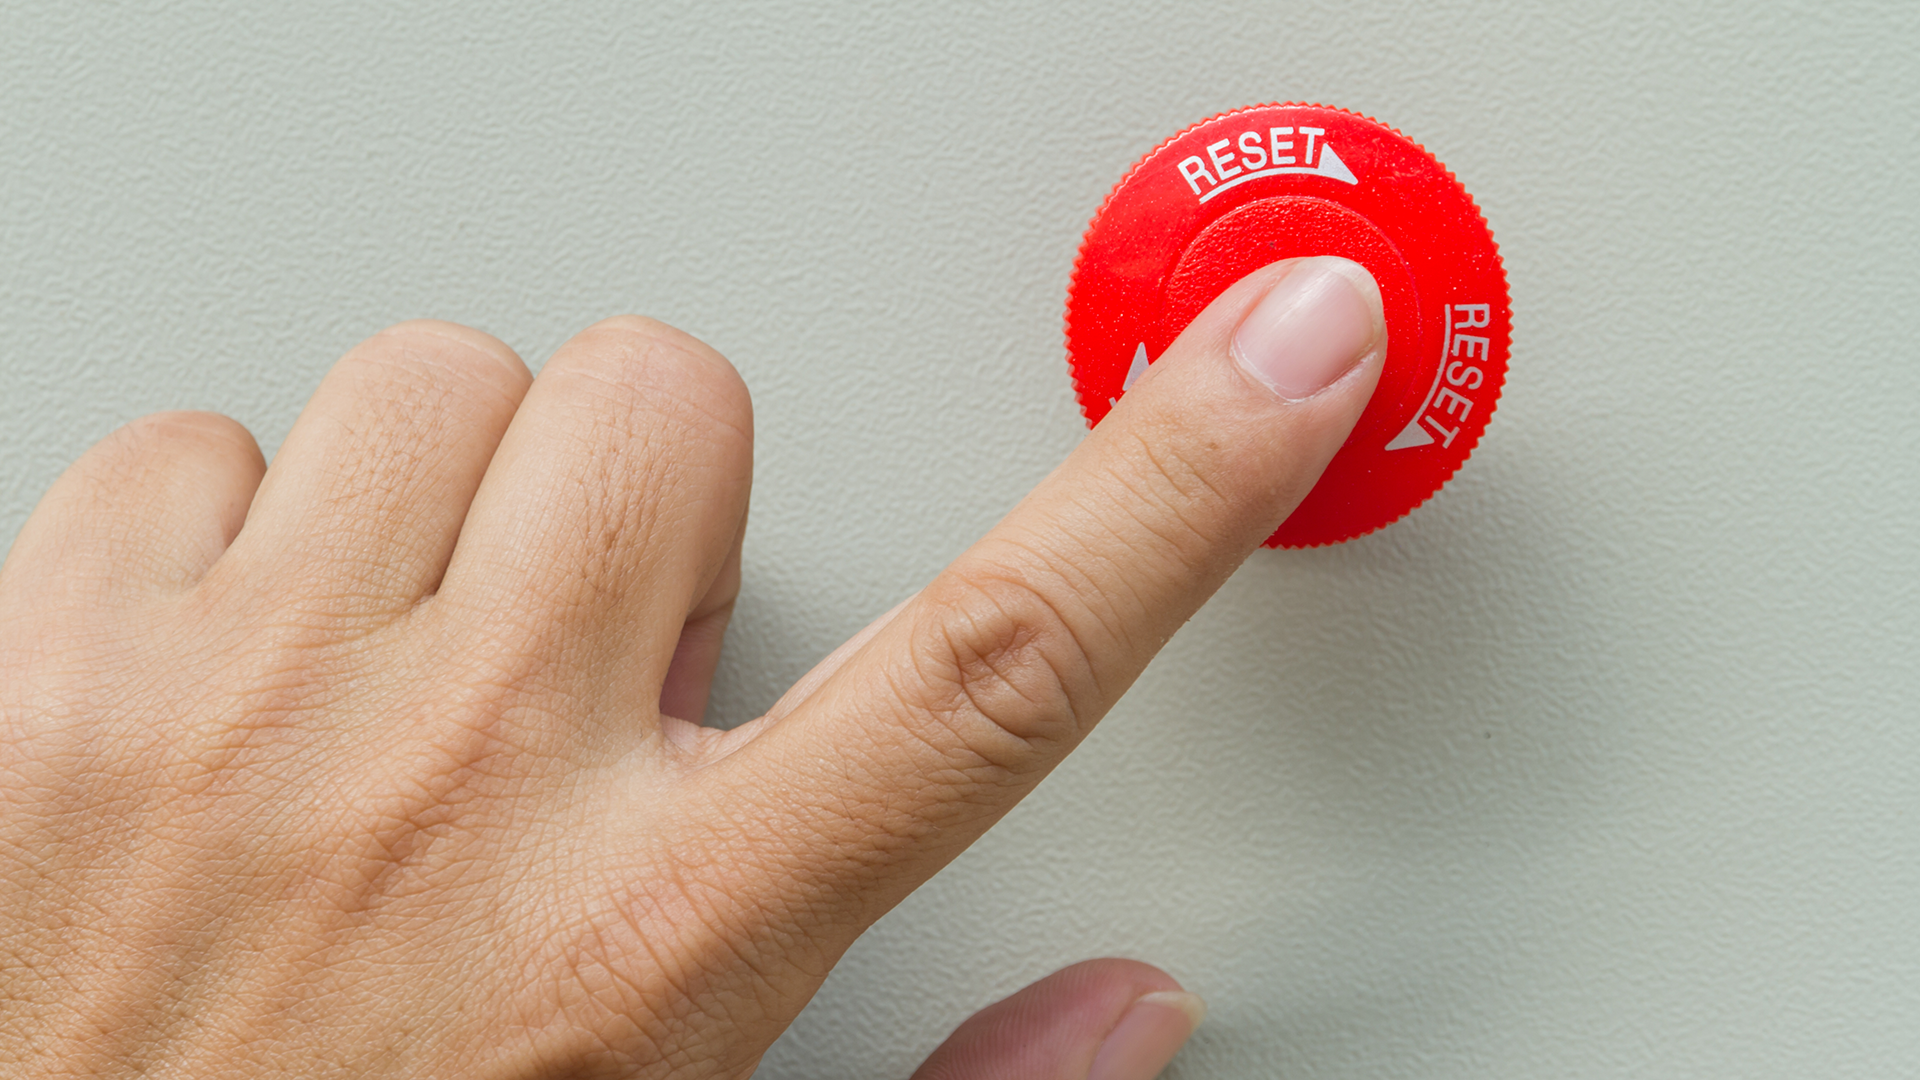 A finger presses a red reset button.